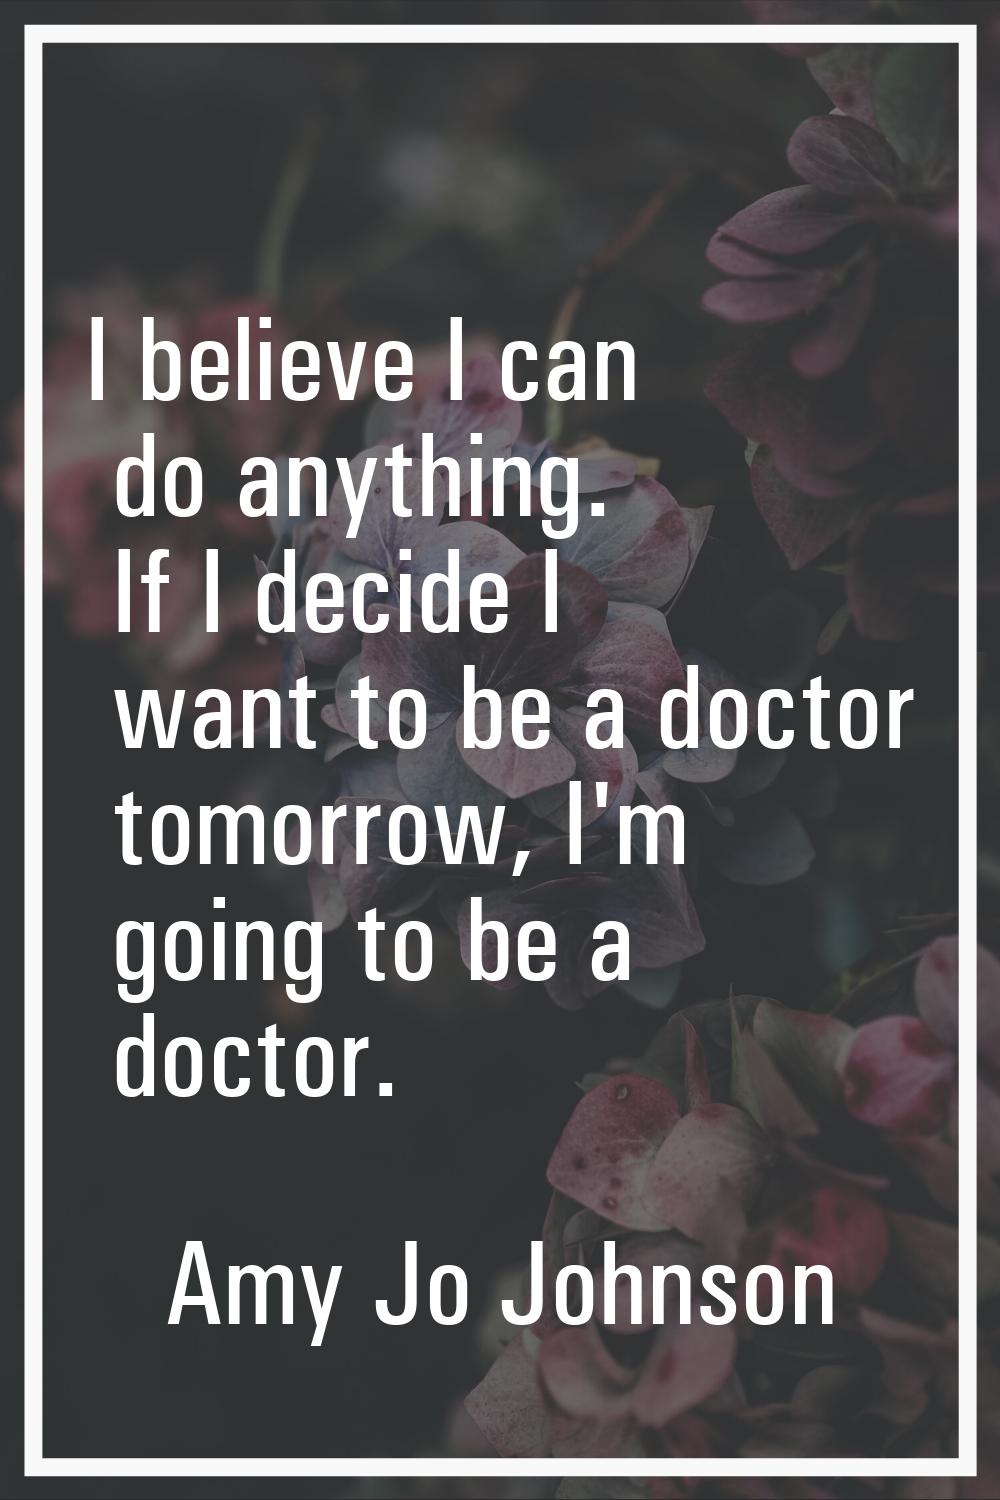 I believe I can do anything. If I decide I want to be a doctor tomorrow, I'm going to be a doctor.